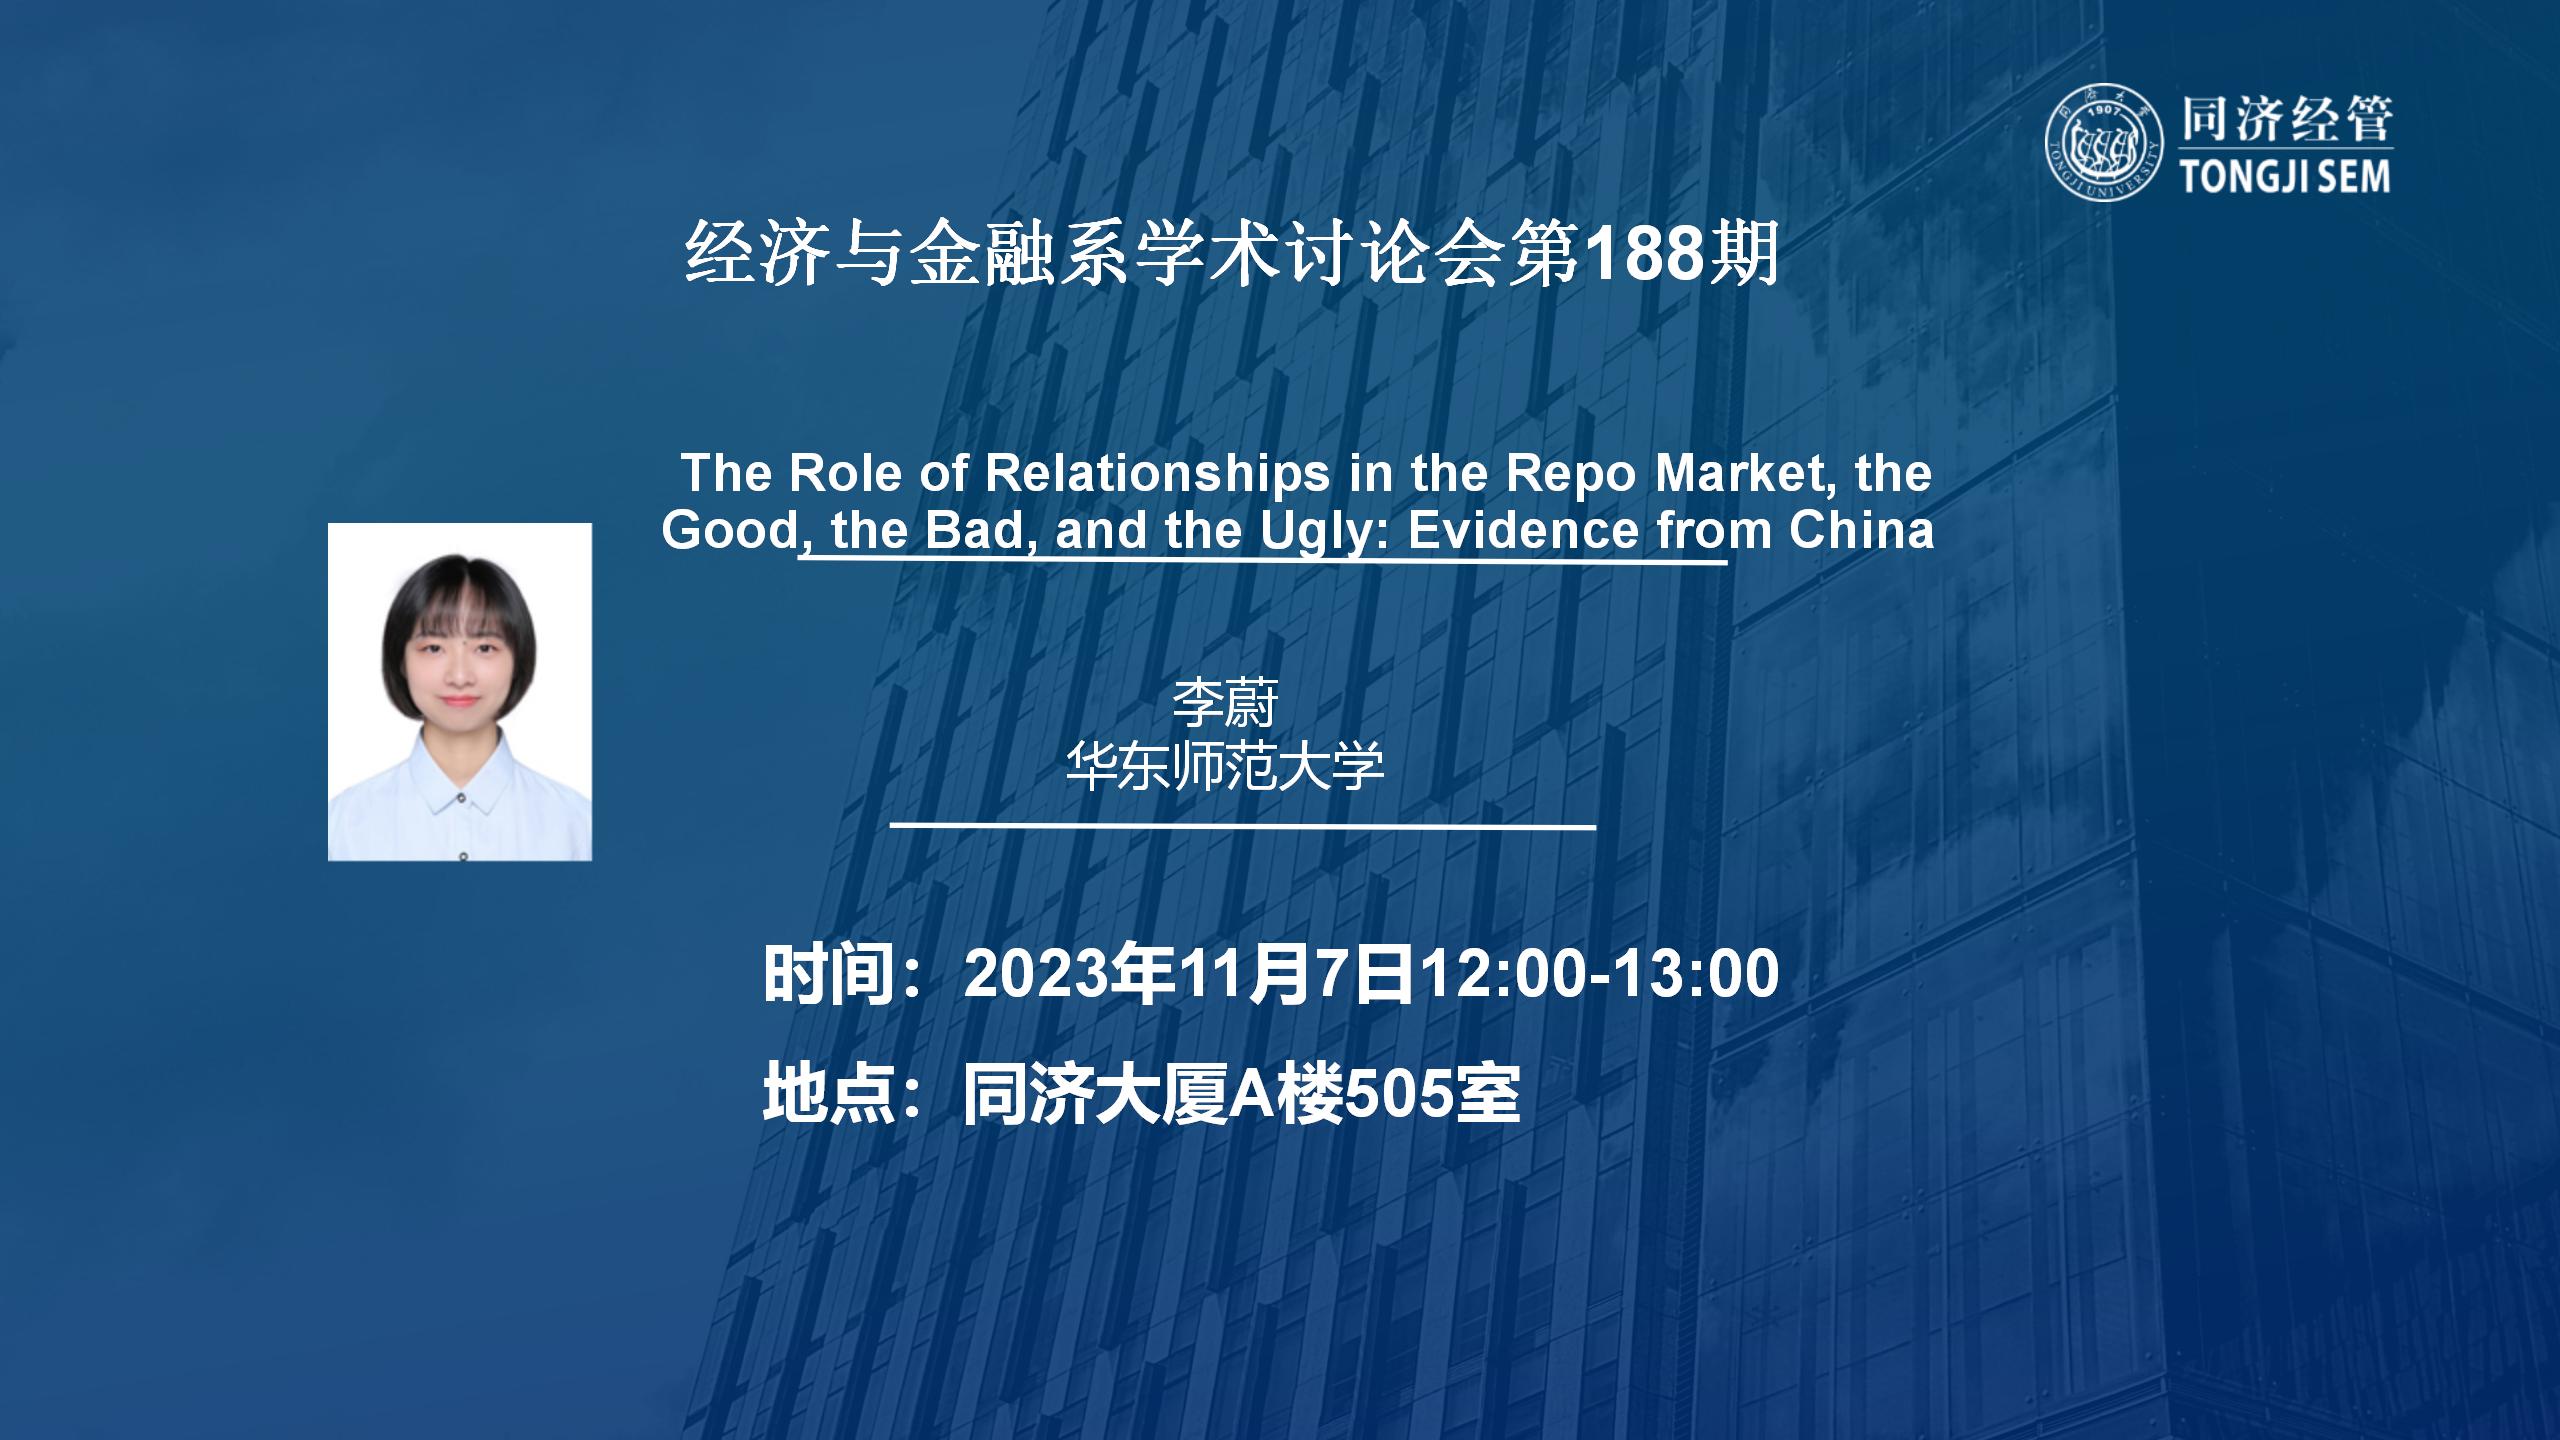 The Role of Relationships in the Repo Market, the Good, the Bad, and the Ugly: Evidence from China